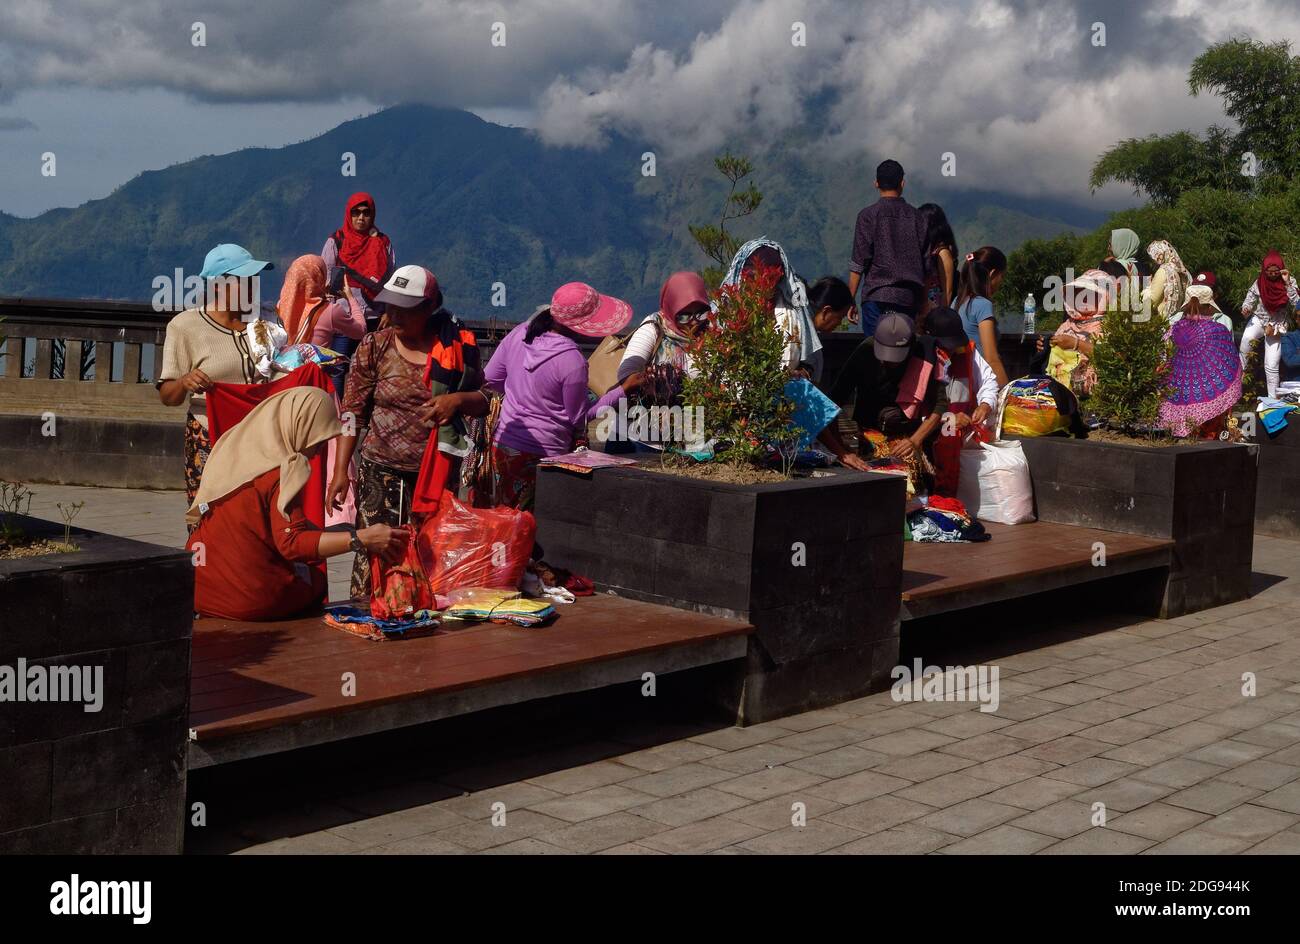 Hawkers with souvenirs selling to tourists at a Penelokan Lake Batur viewing point in Bali, Indonesia Stock Photo